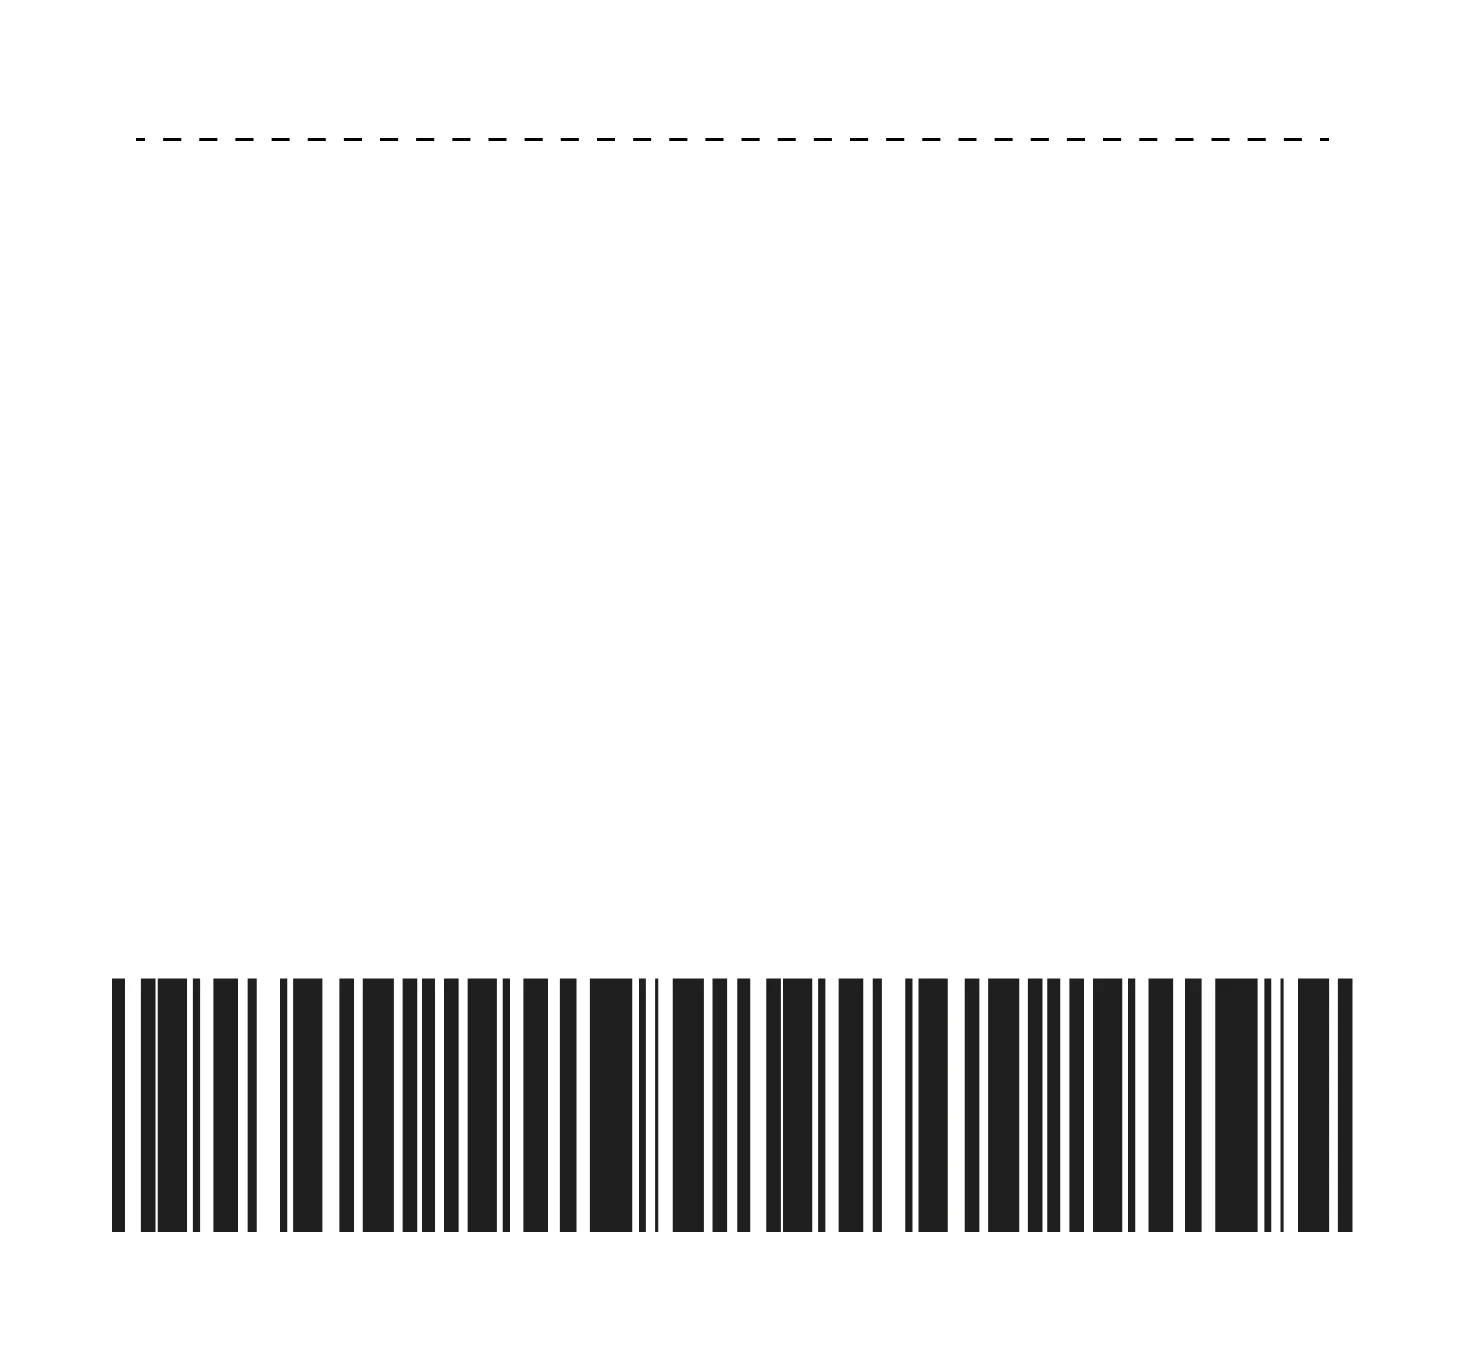 receipt image for online store